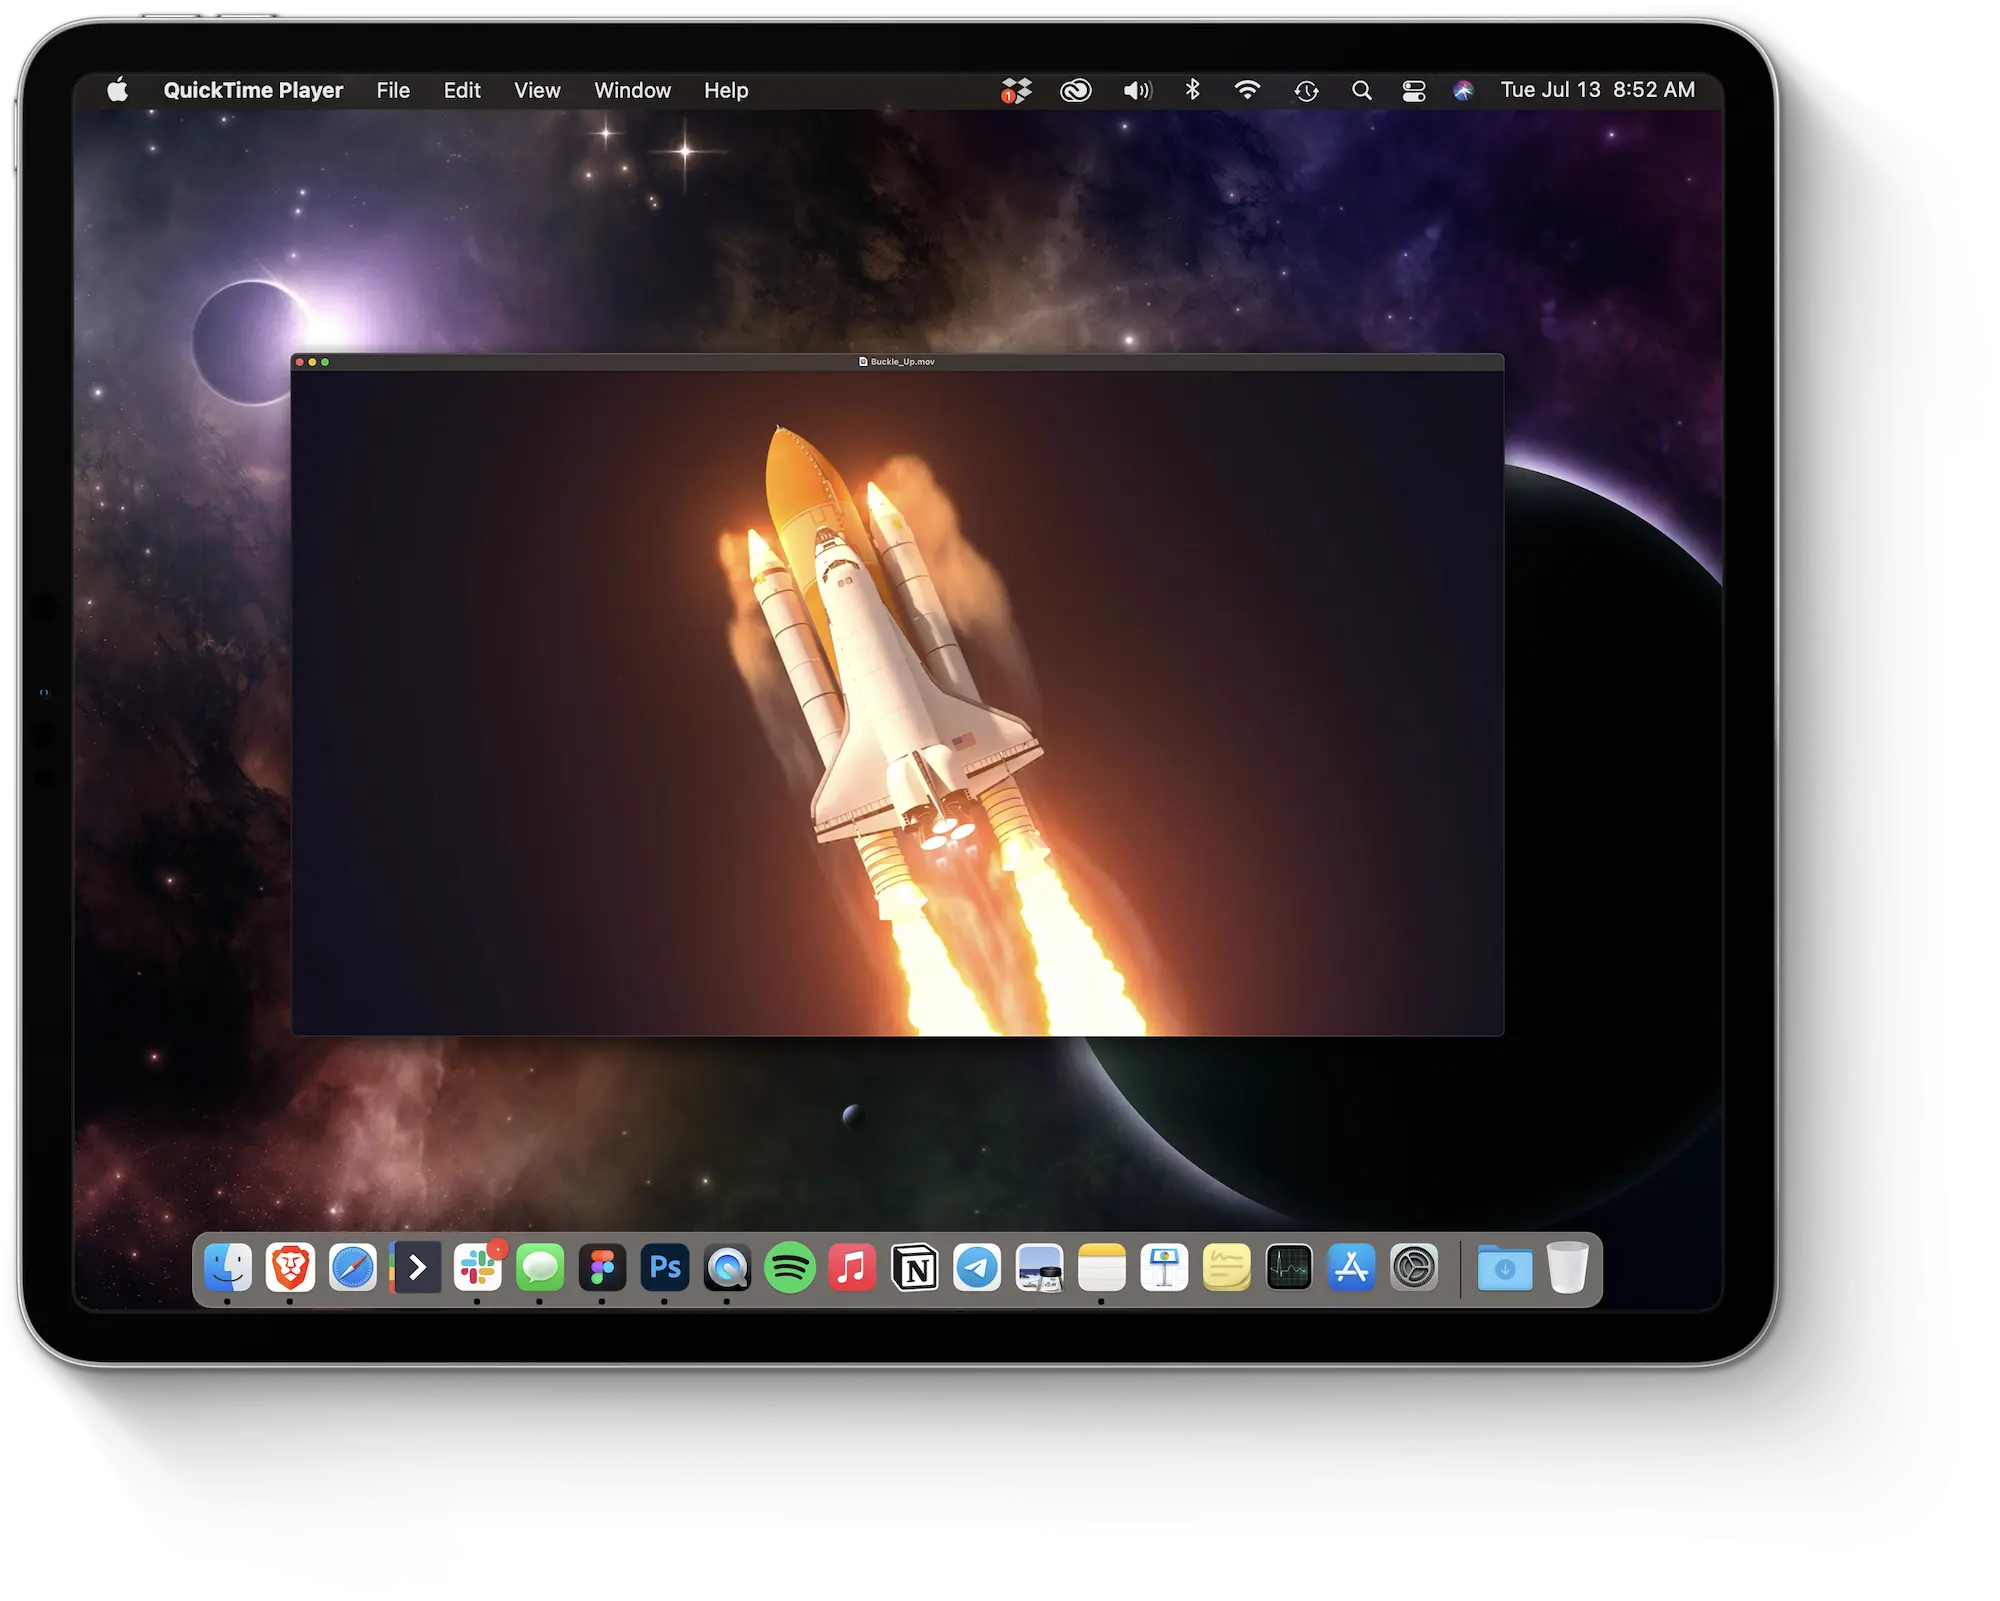 An iPad shows a video of a rocketship in space